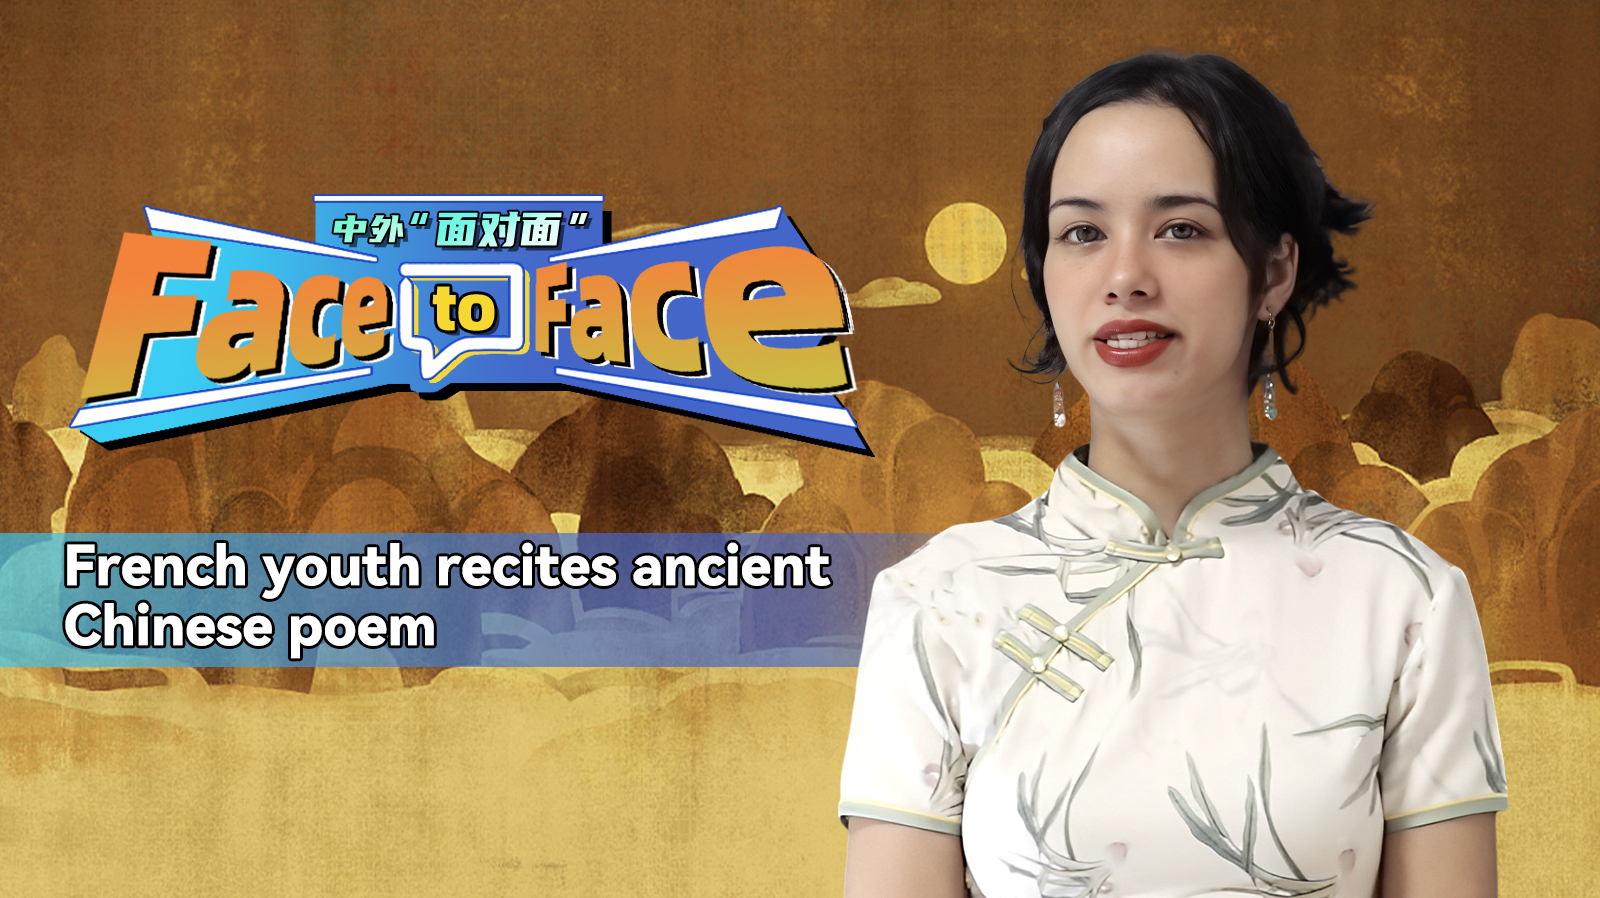 Face to face: French youth recites ancient Chinese poem